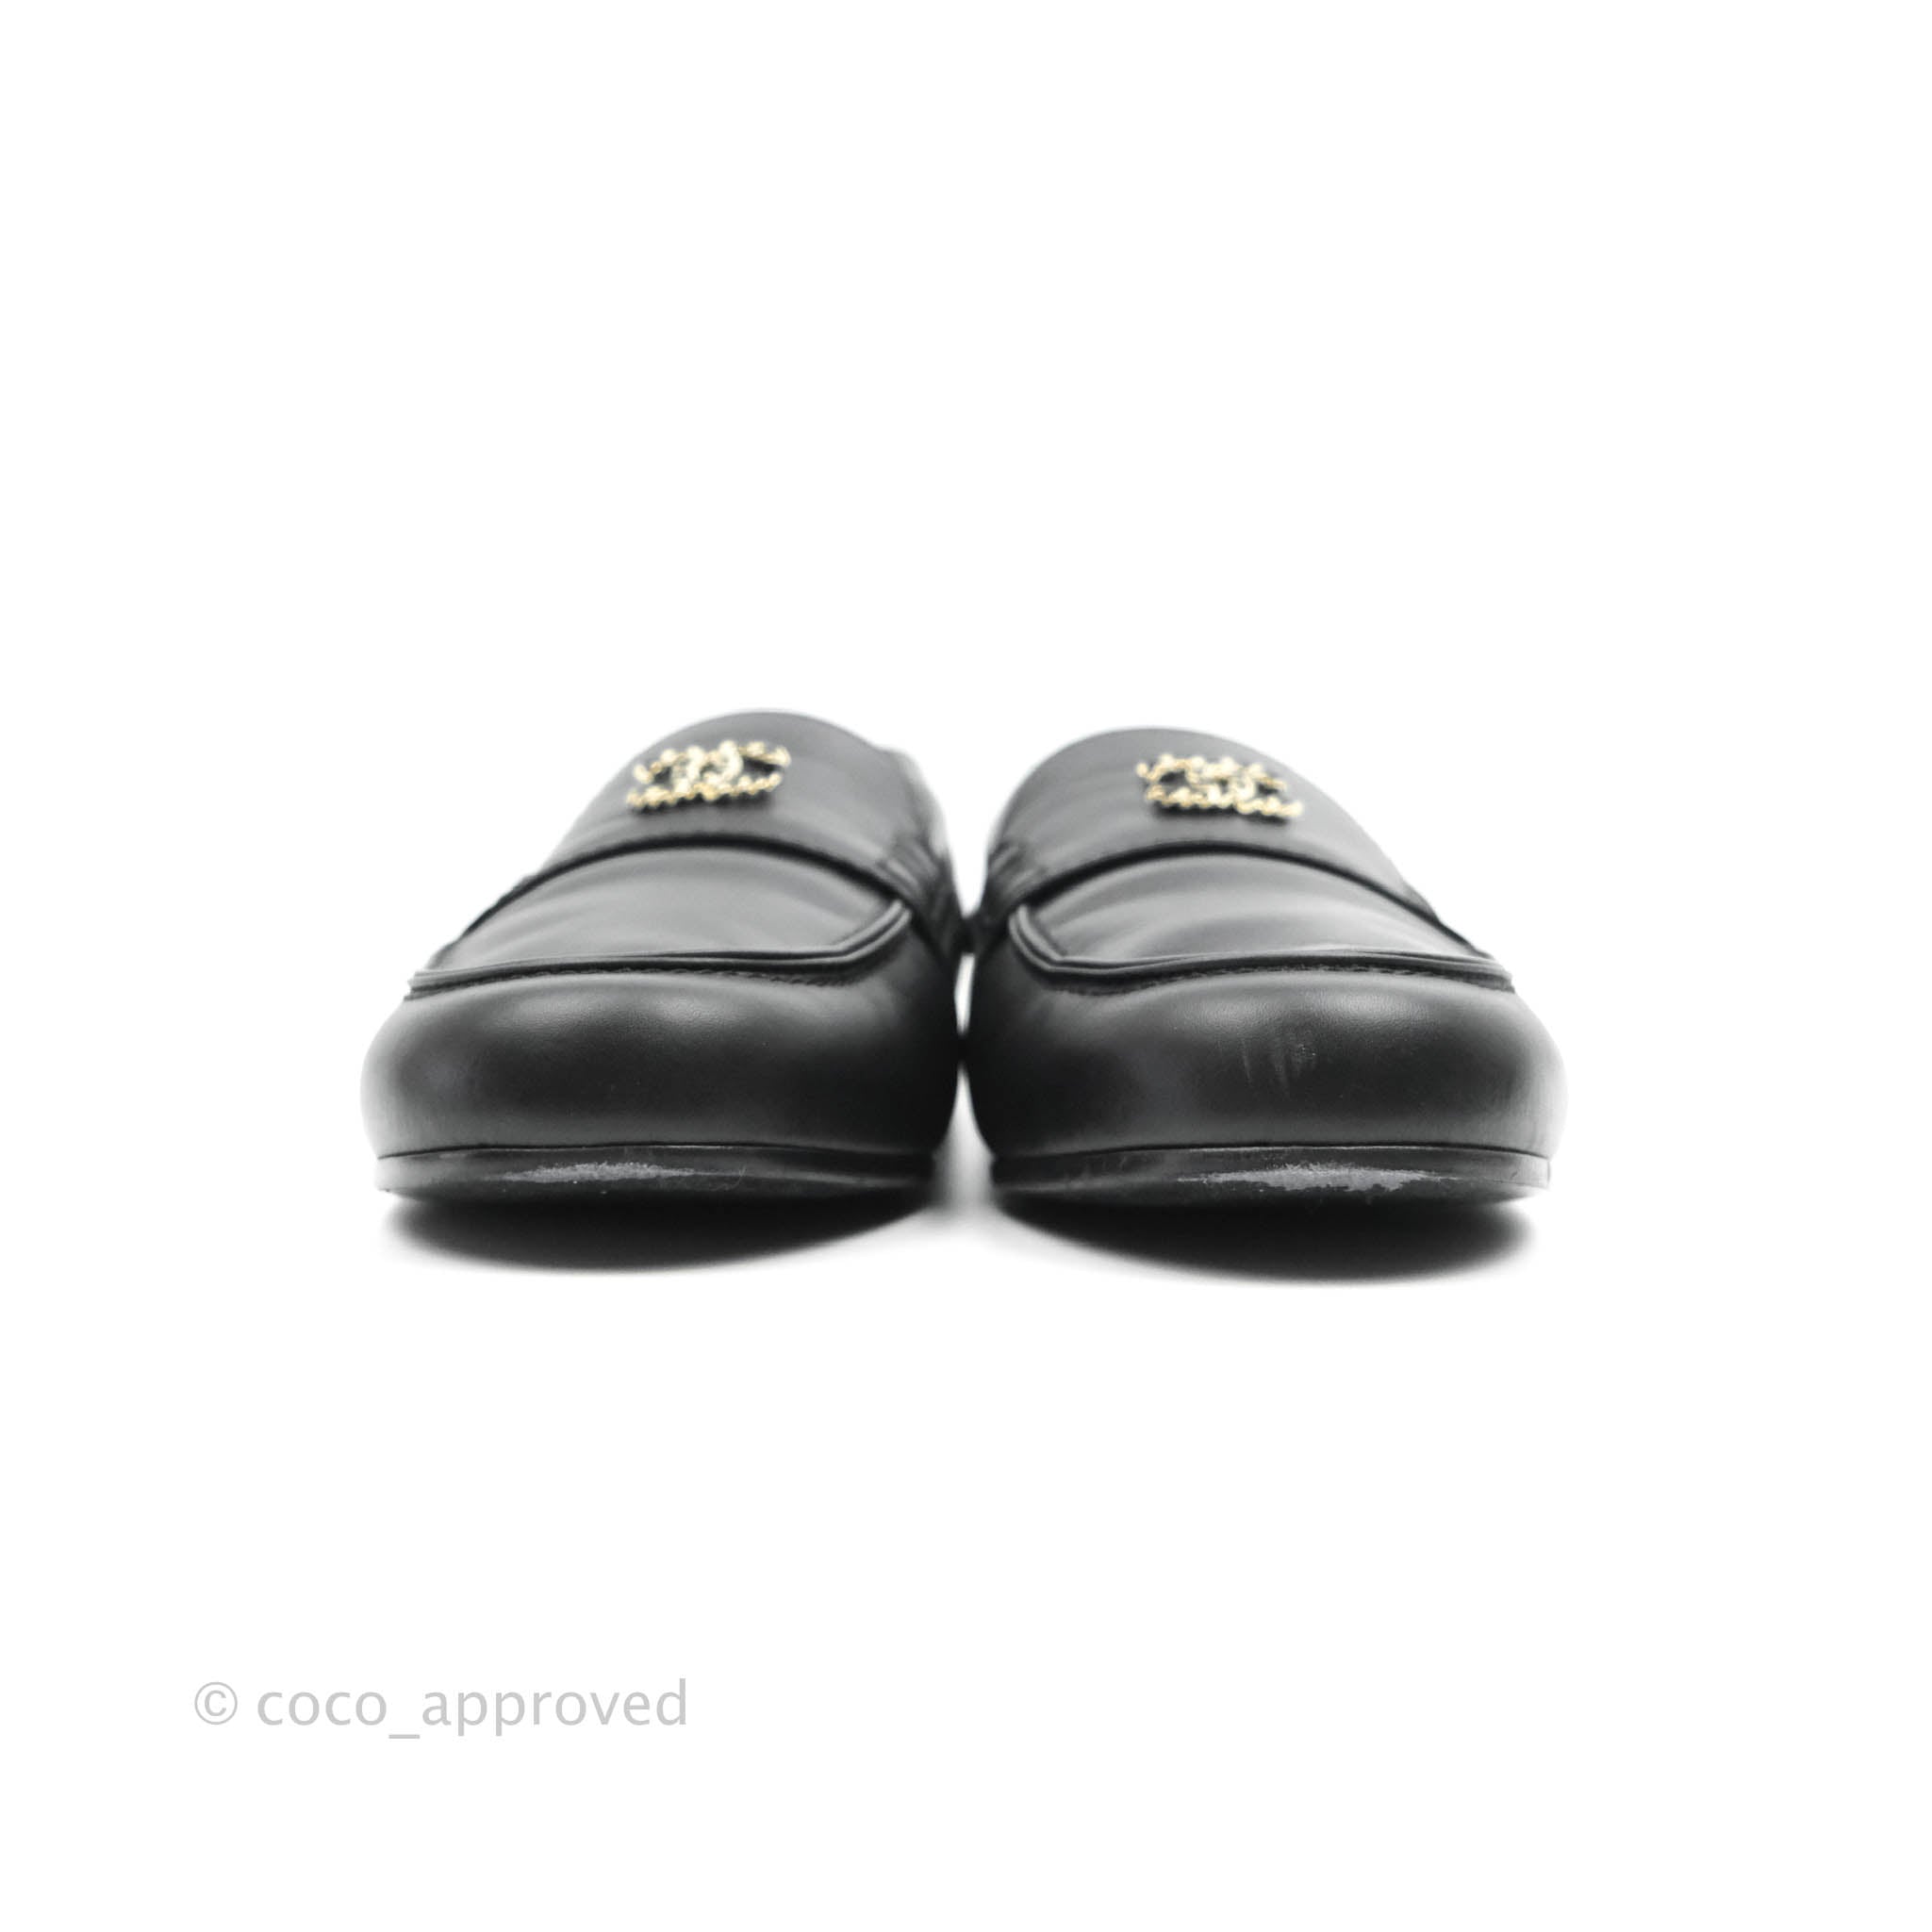 Chanel Quilted Tab Loafers Black Leather - G36646 X56469 94305 / G36646  X01000 94305 - US